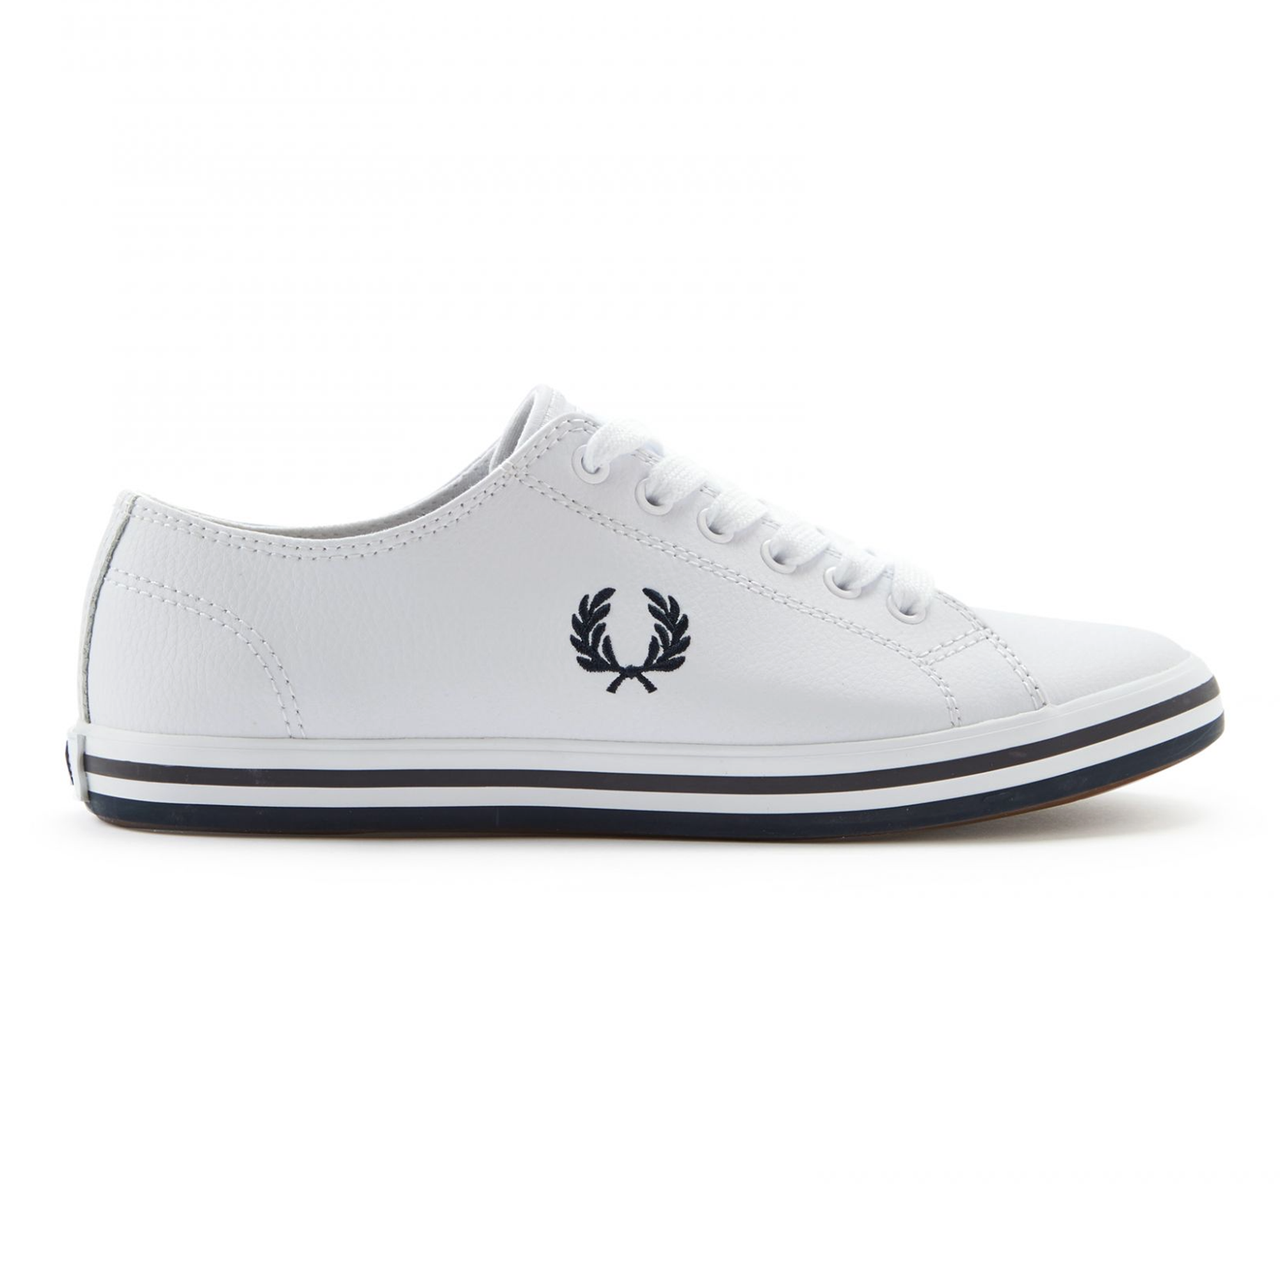 FRED PERRY KINGSTON LEATHER TENNIS SHOES